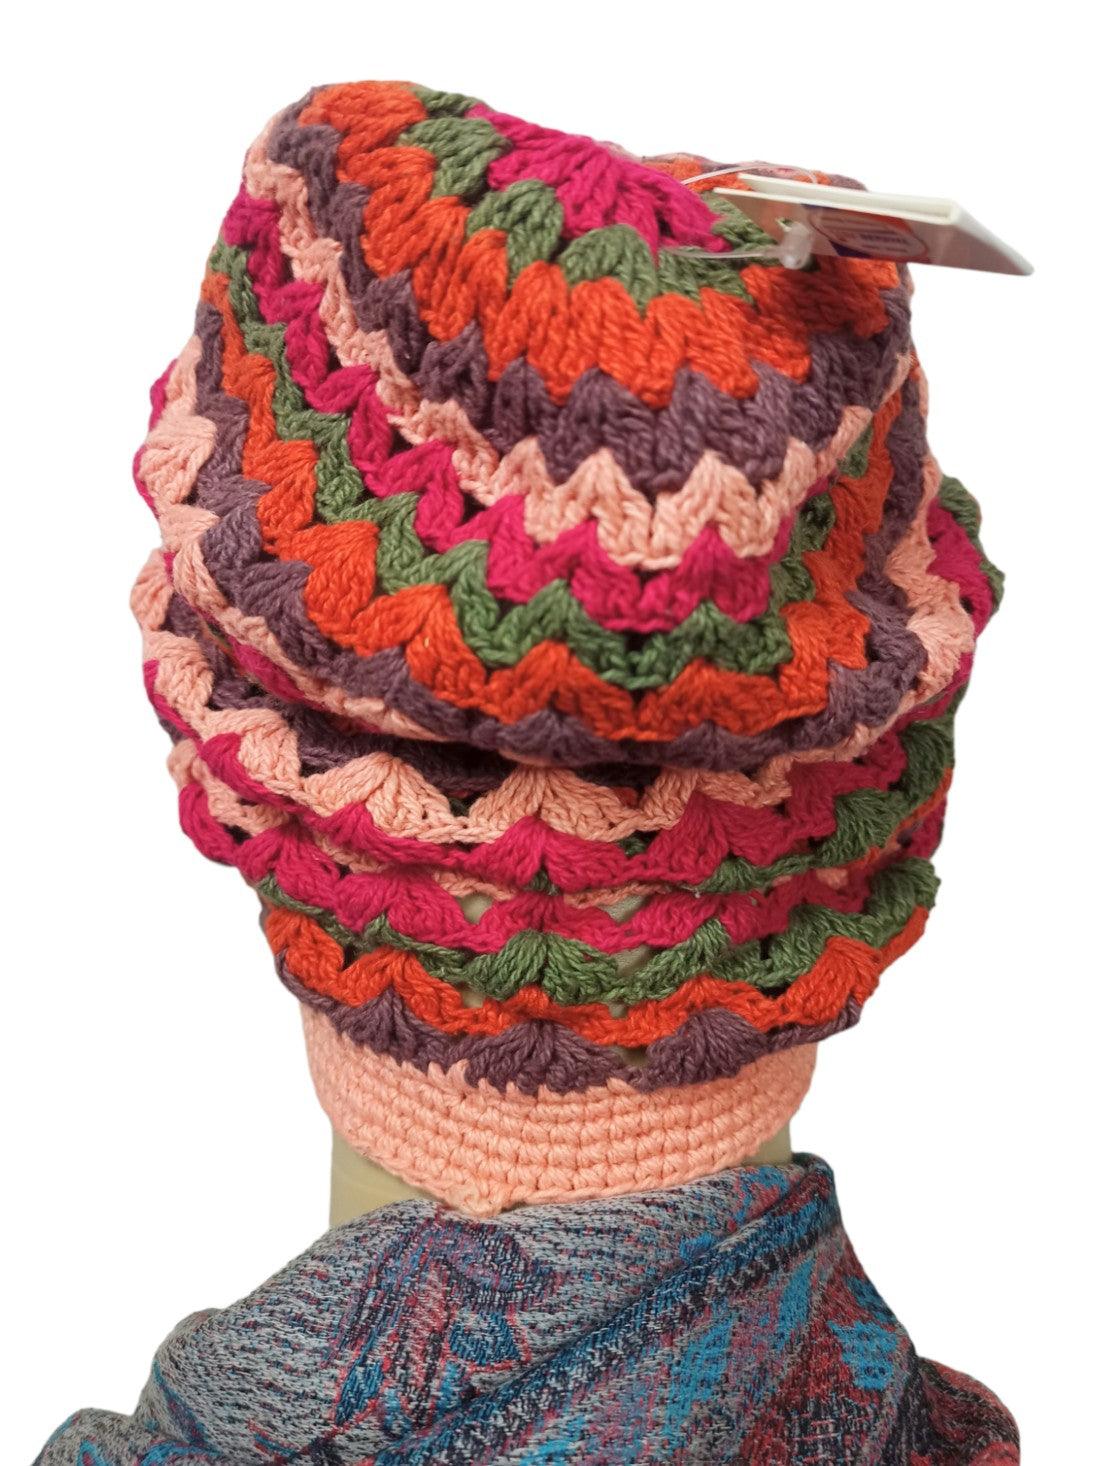 Knotted Handwoven Cap